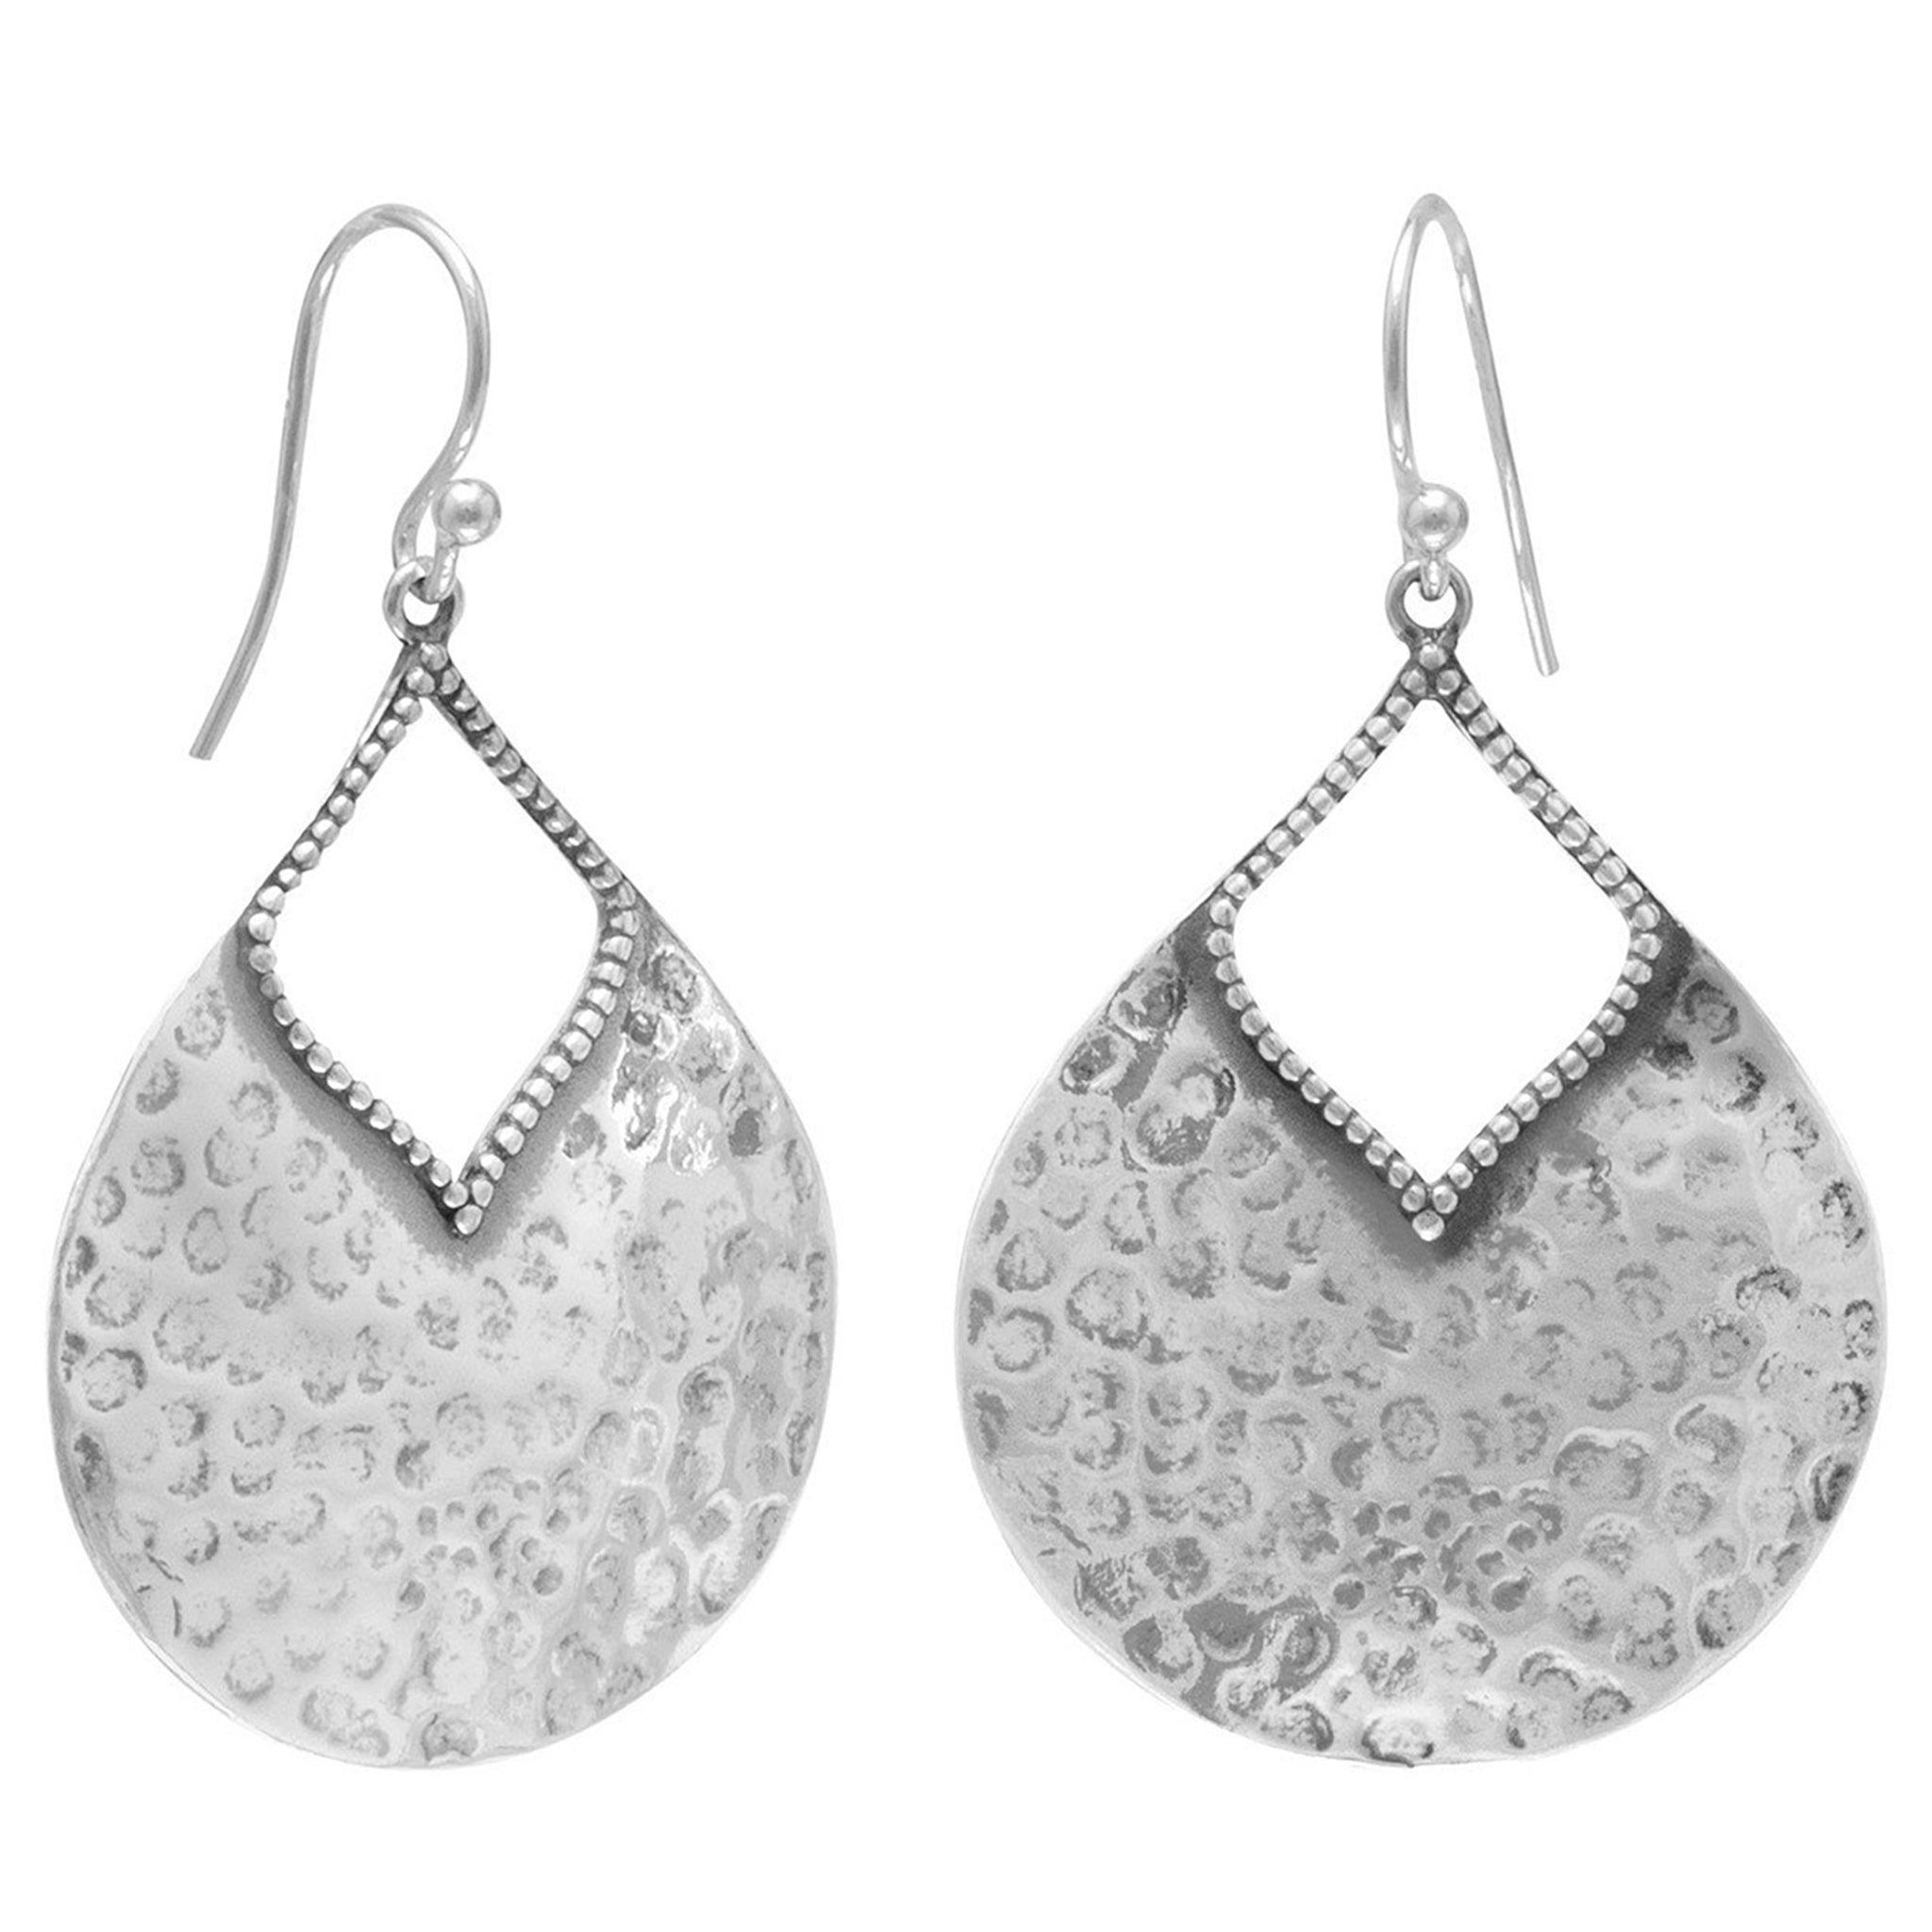 Hammered Silver Bead Accent Earrings